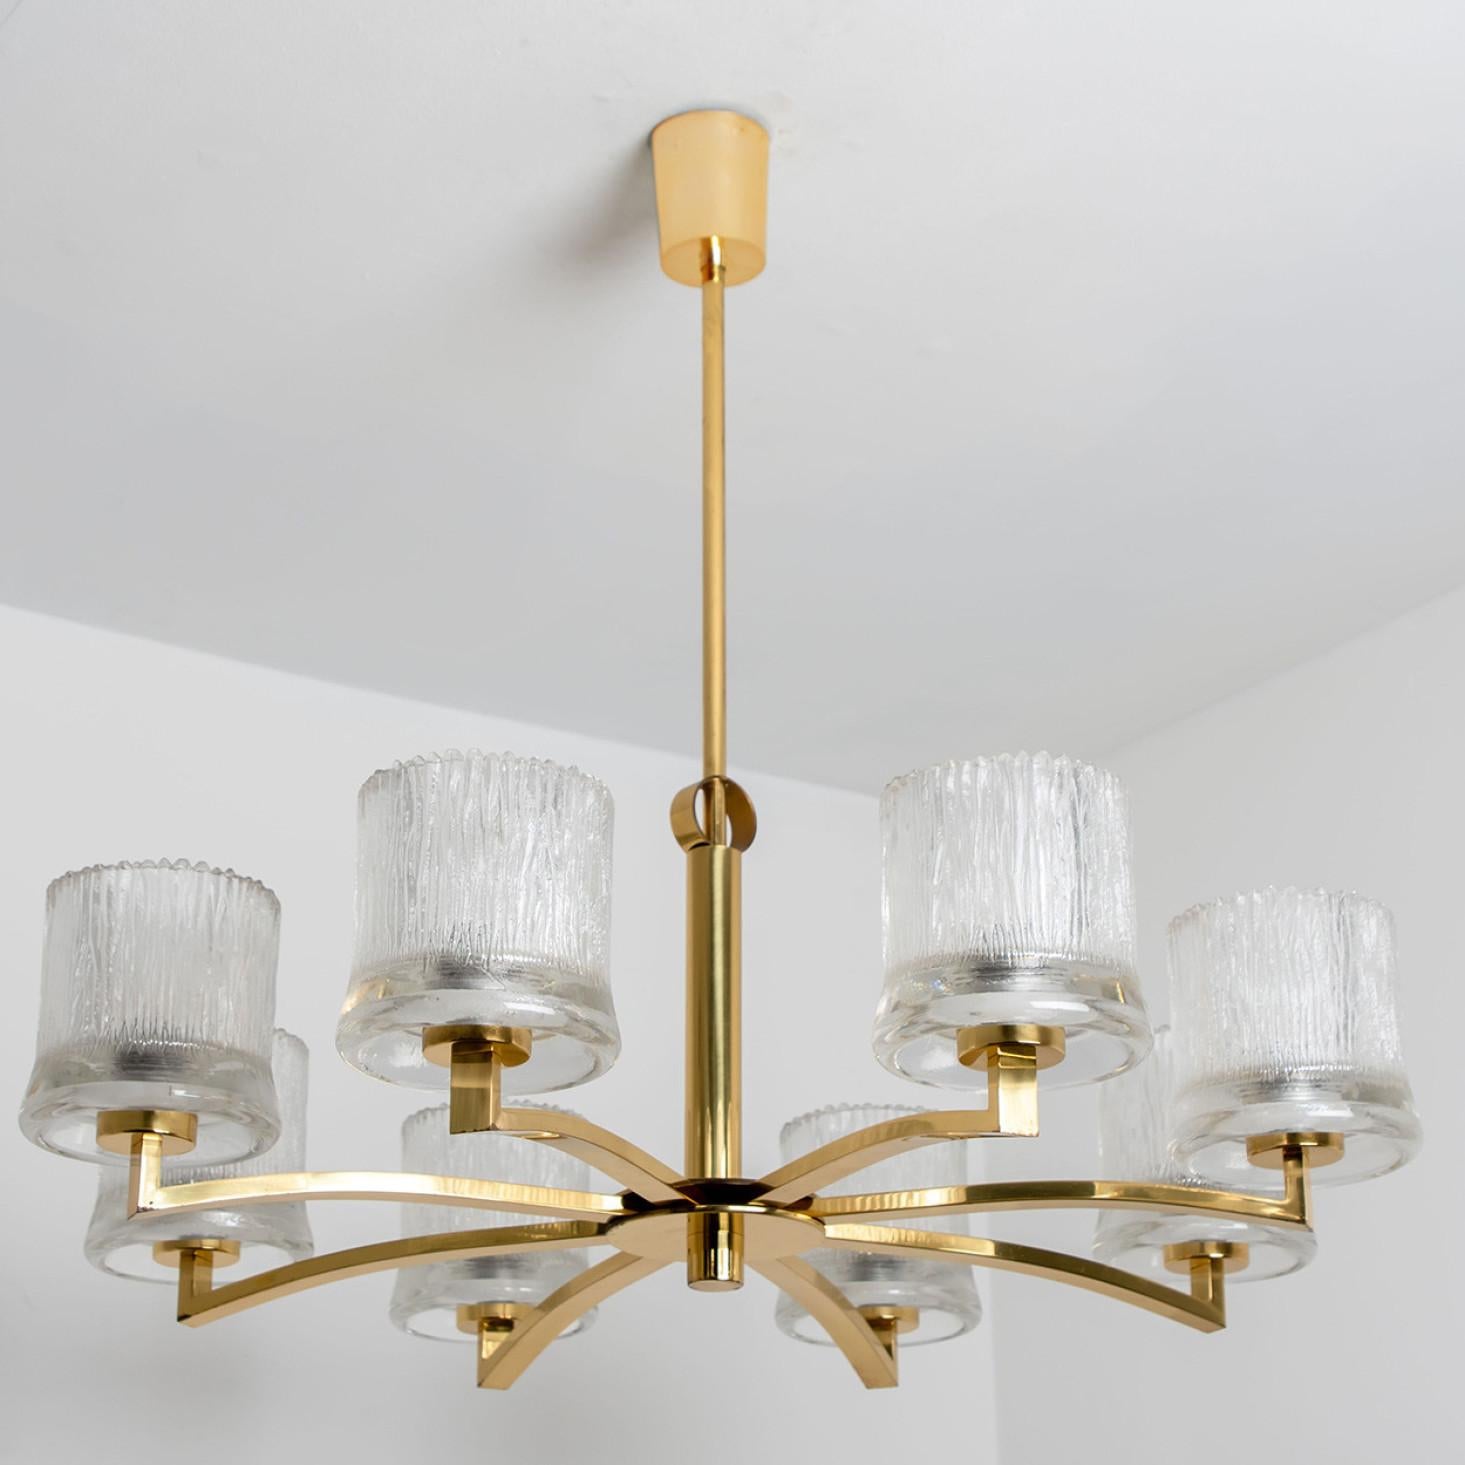 Beautiful chandelier by Glashutte Limburg. Manufactured in Germany around 1960.
With beautiful glass shades and brass details on a brass mounting hardware.
Illuminates beautifully.

Measures:
H 27.56 in. x D 29.53 in.
H 70 cm x D 75 cm

The